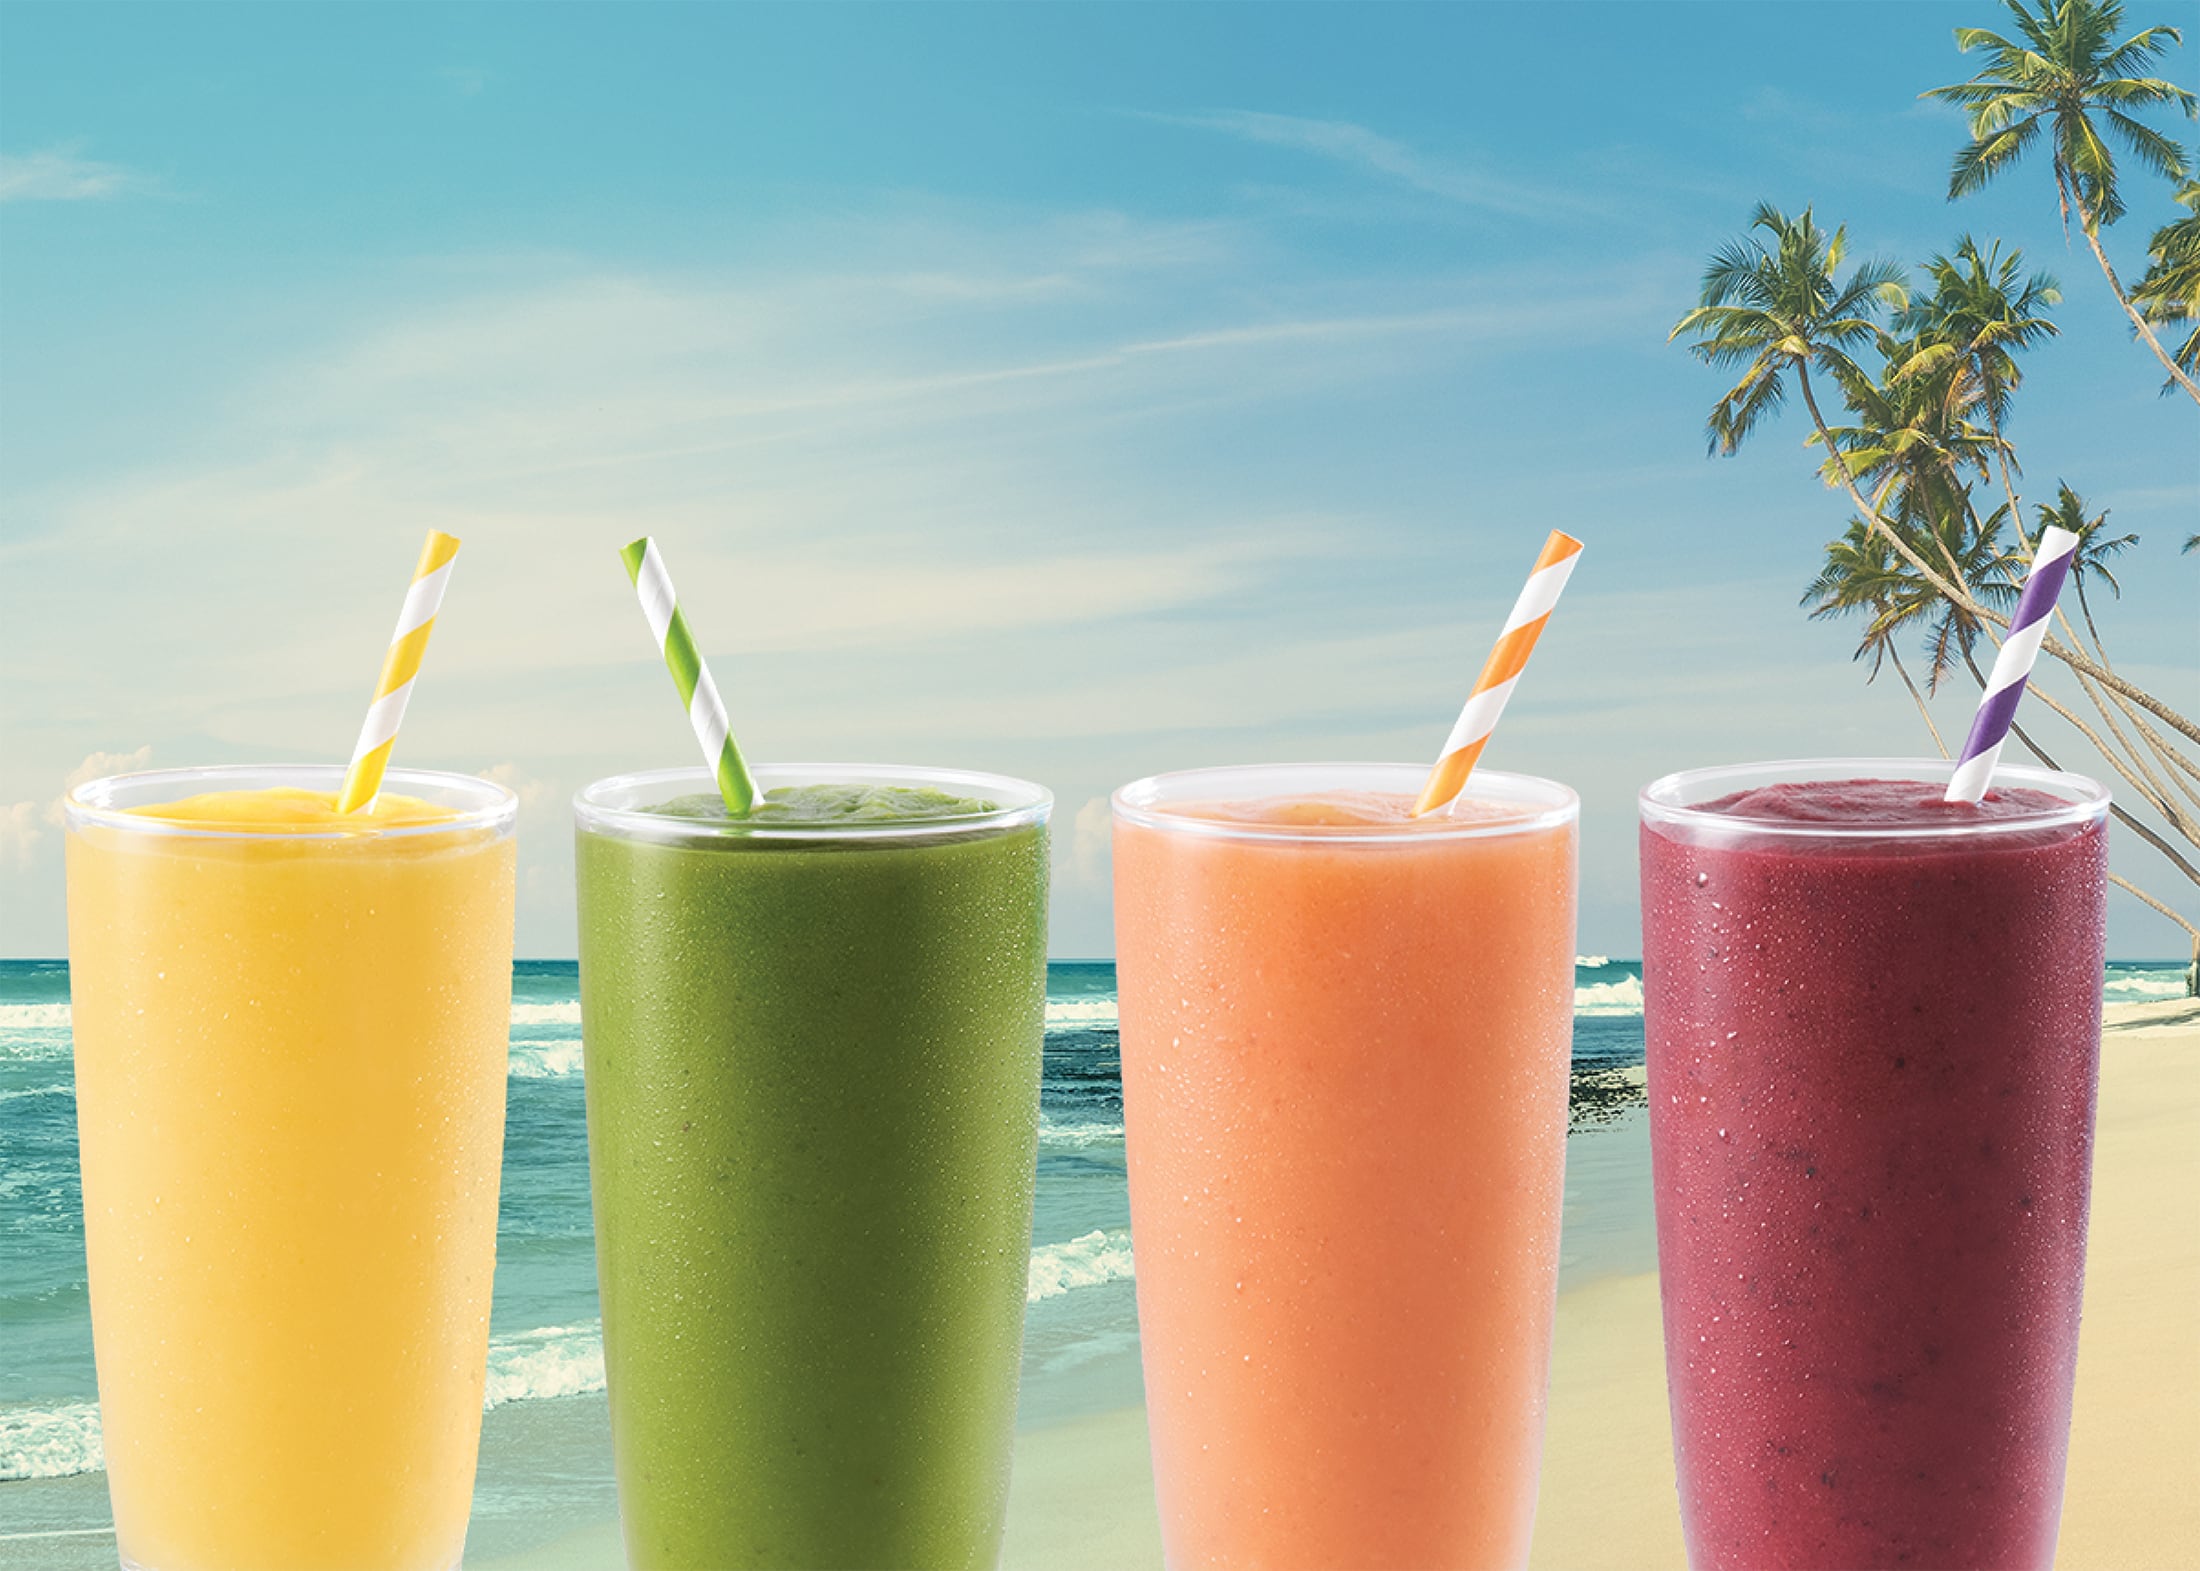 Tropical Smoothie Cafe Puts Vital Proteins® Collagen On The Menu